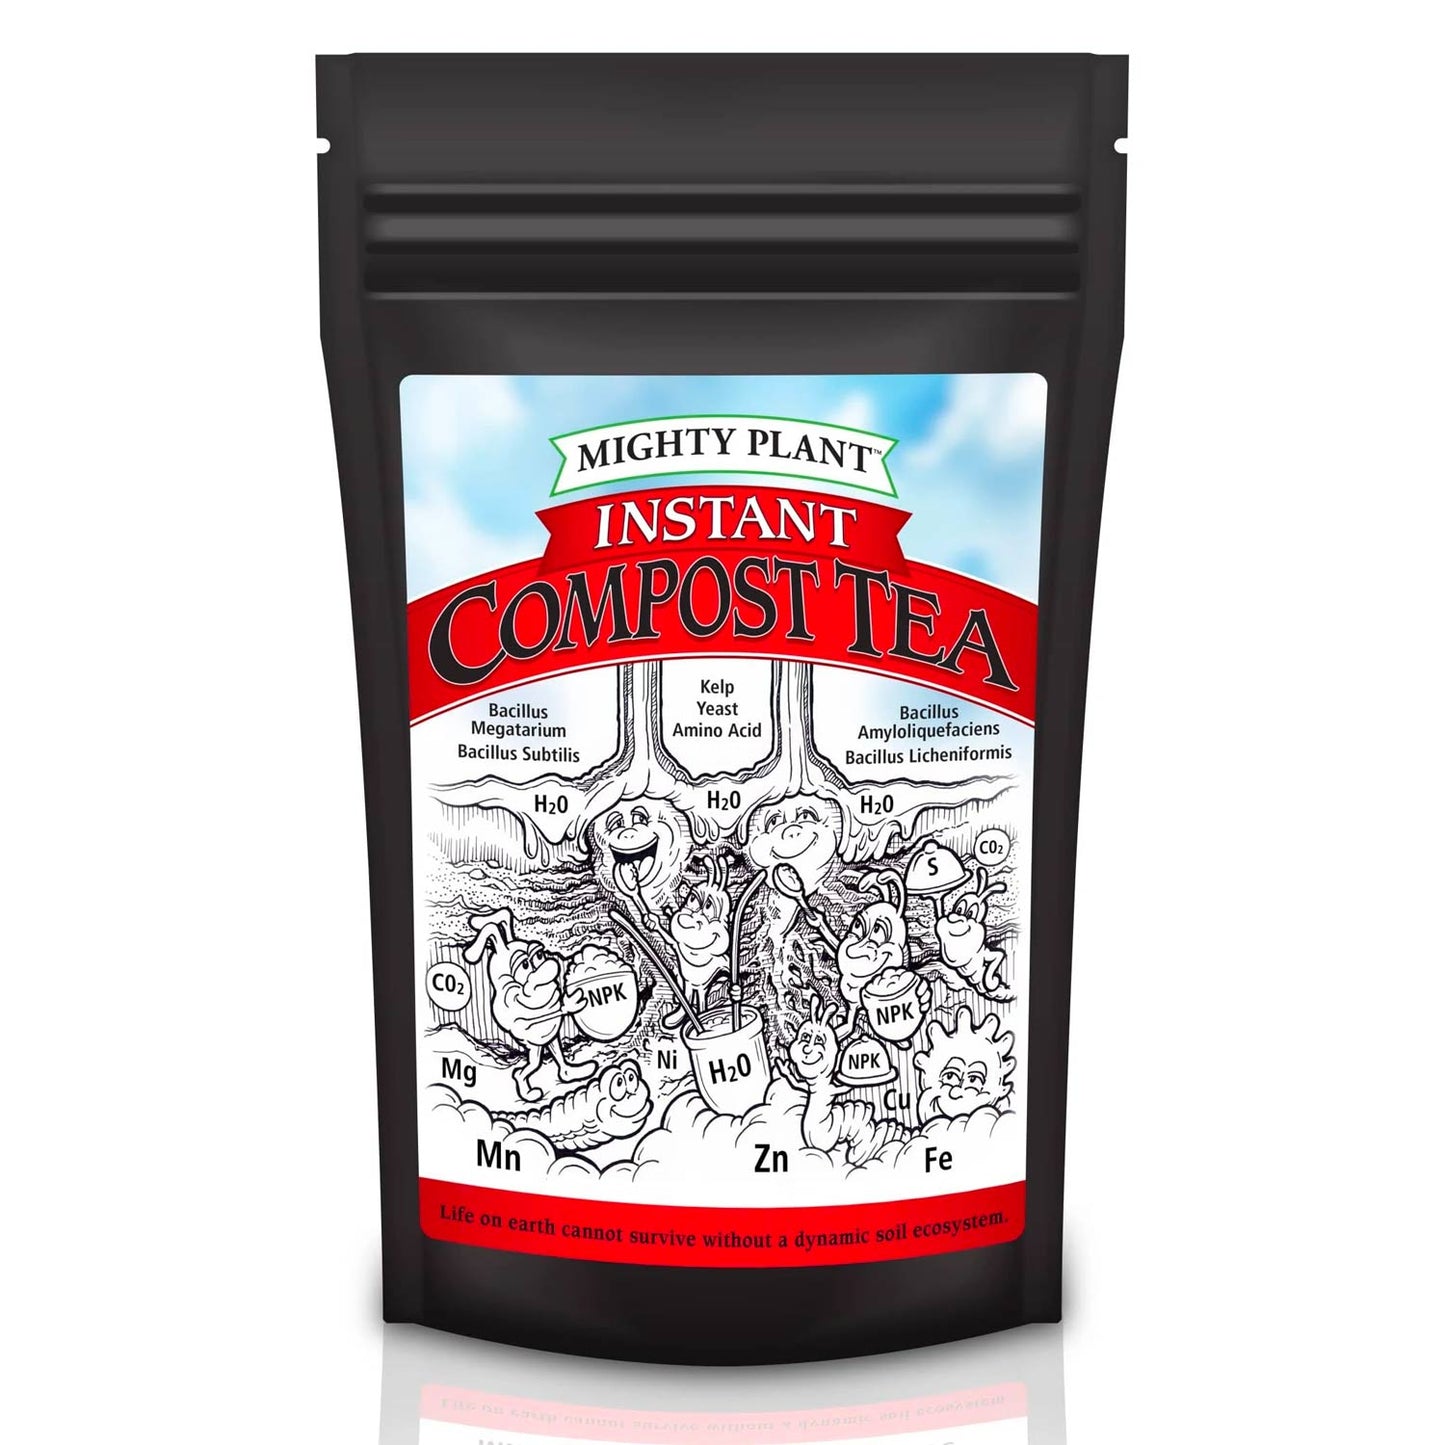 Instant Compost Tea from Mighty Plant product image in white background